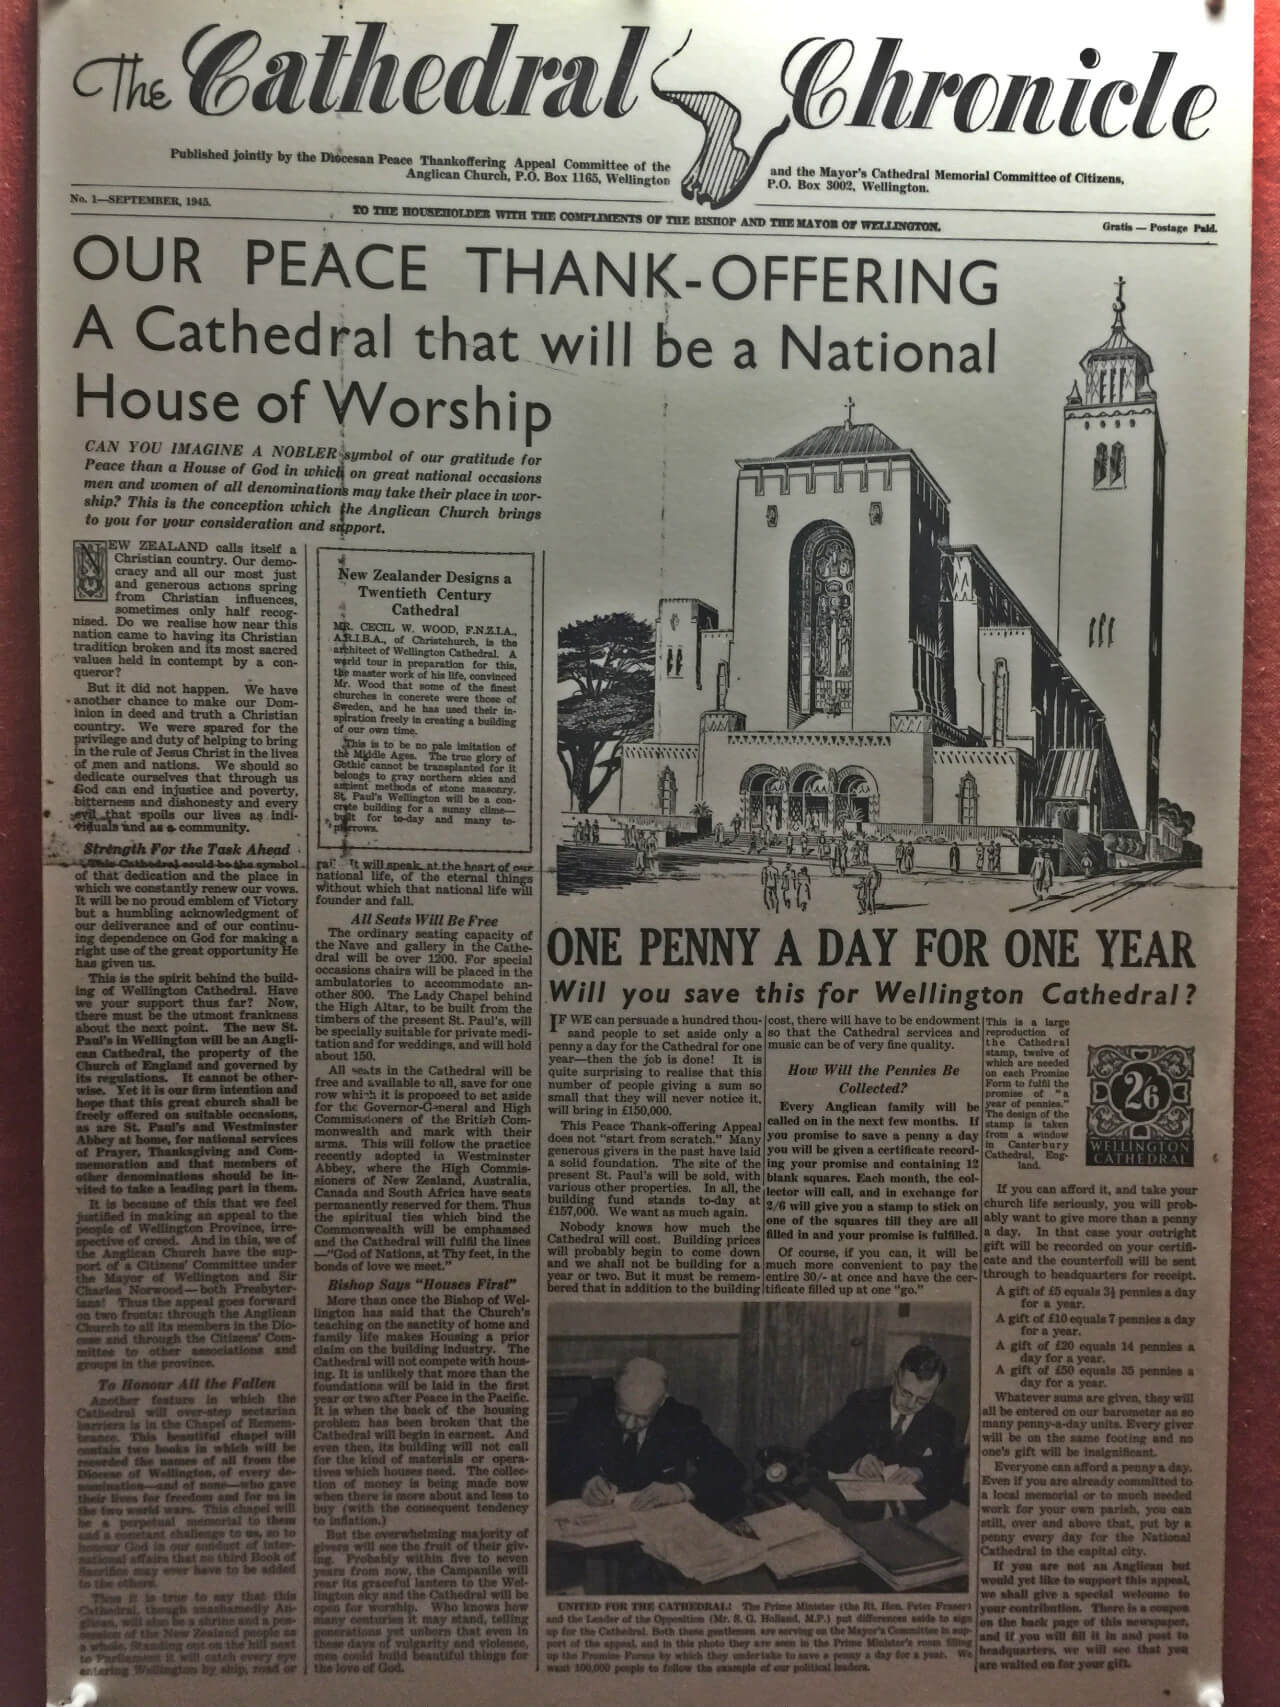 Newspaper article - Wellington Cathedral